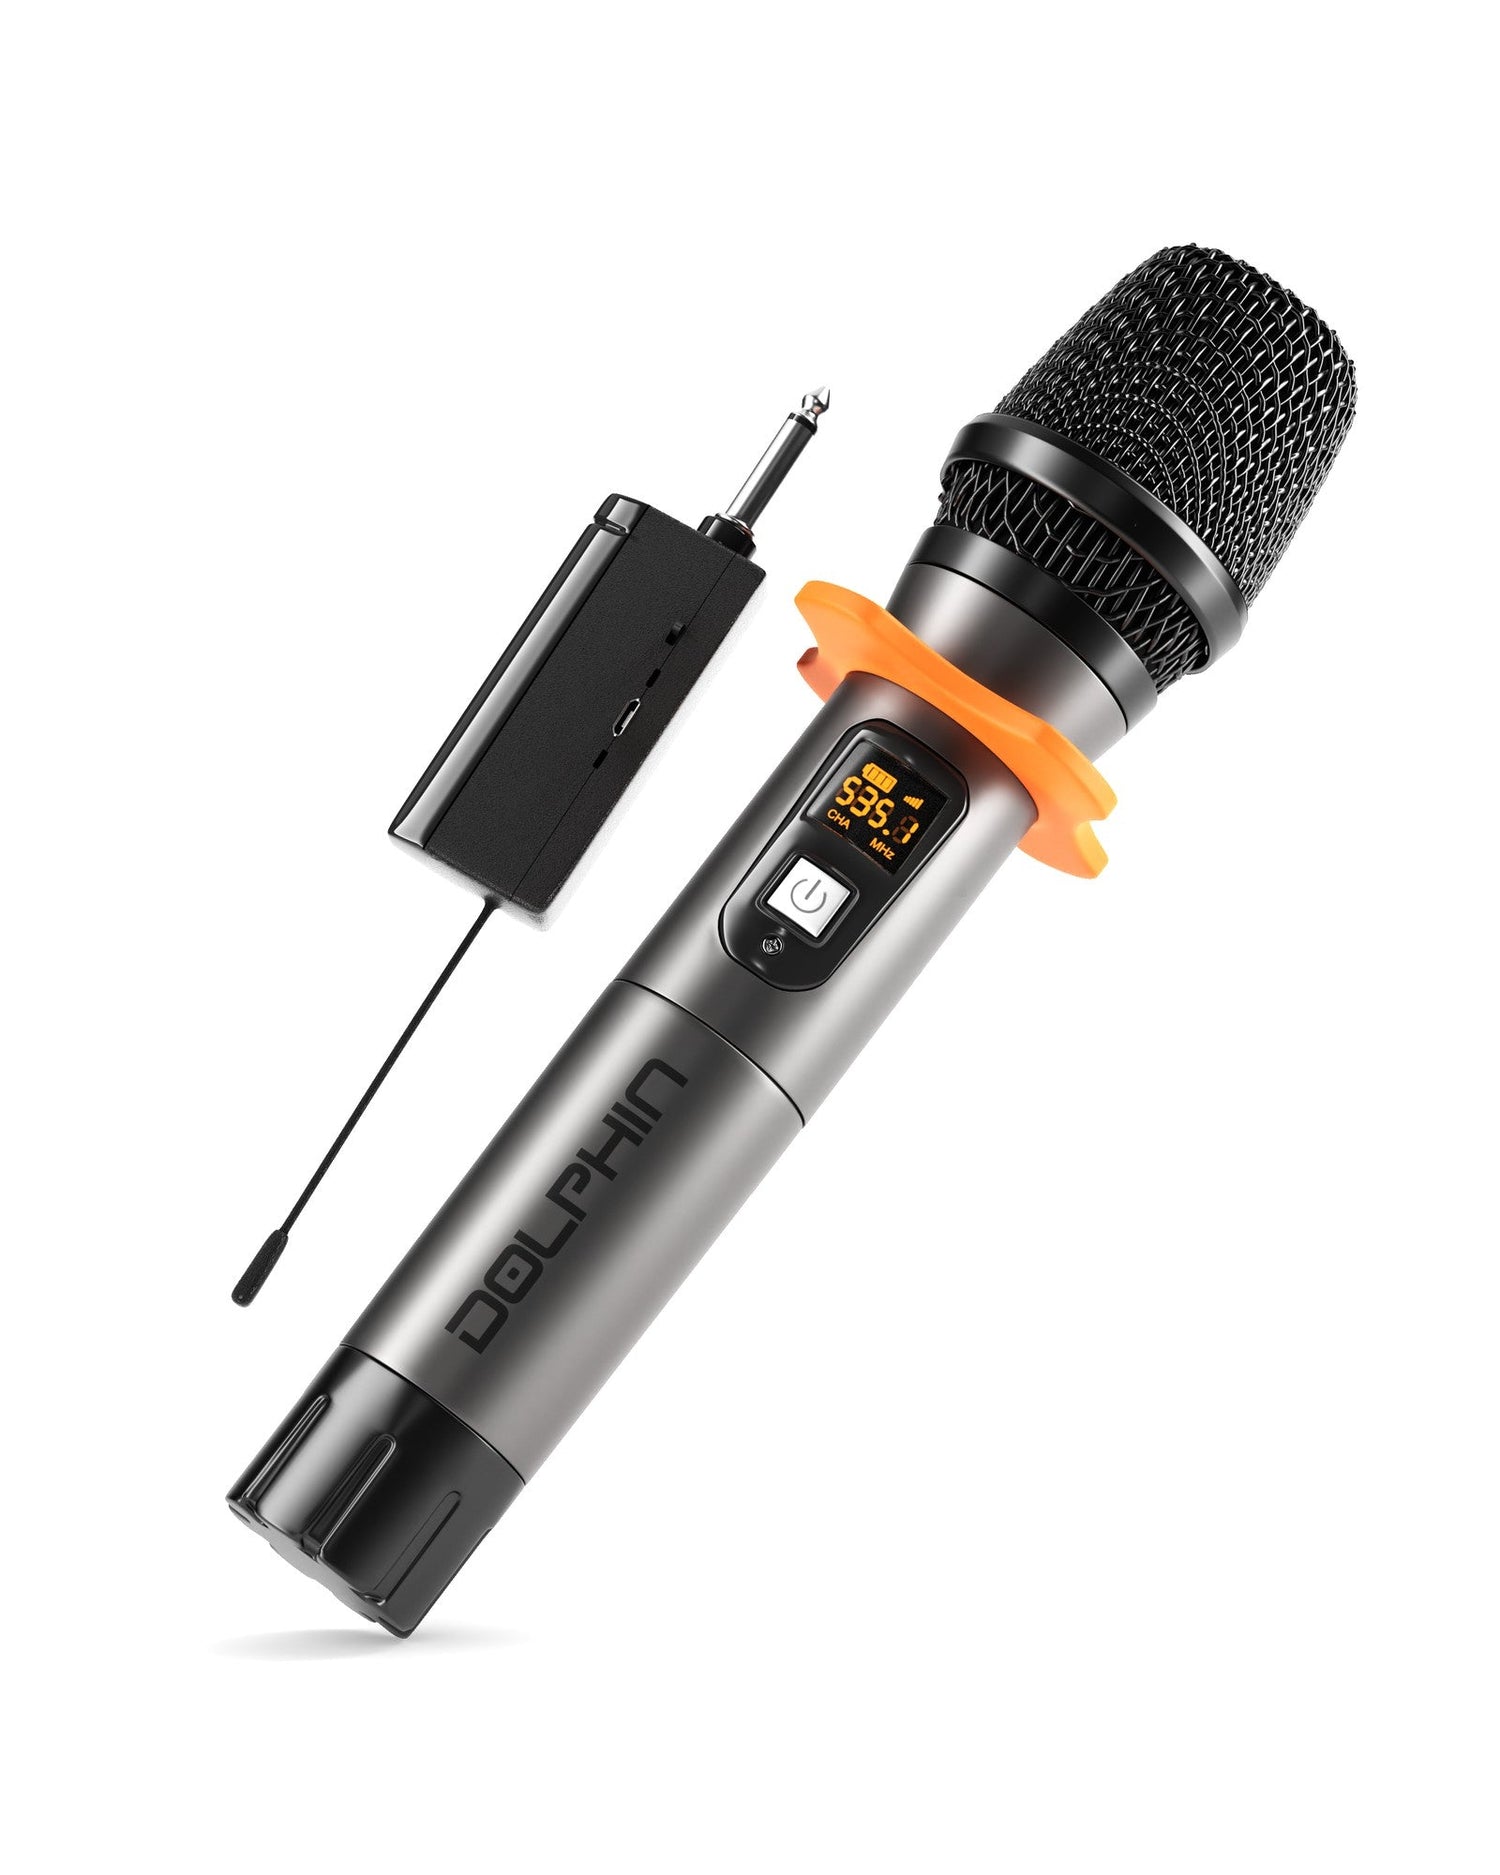 Dolphin MCX10 Wireless Microphone, Portable Handheld Cordless Karaoke Microphone for Speakers with Transmitter, Silicon Ring, and Batteries - Top ElectrosWireless MicrophoneMCX10850006218950